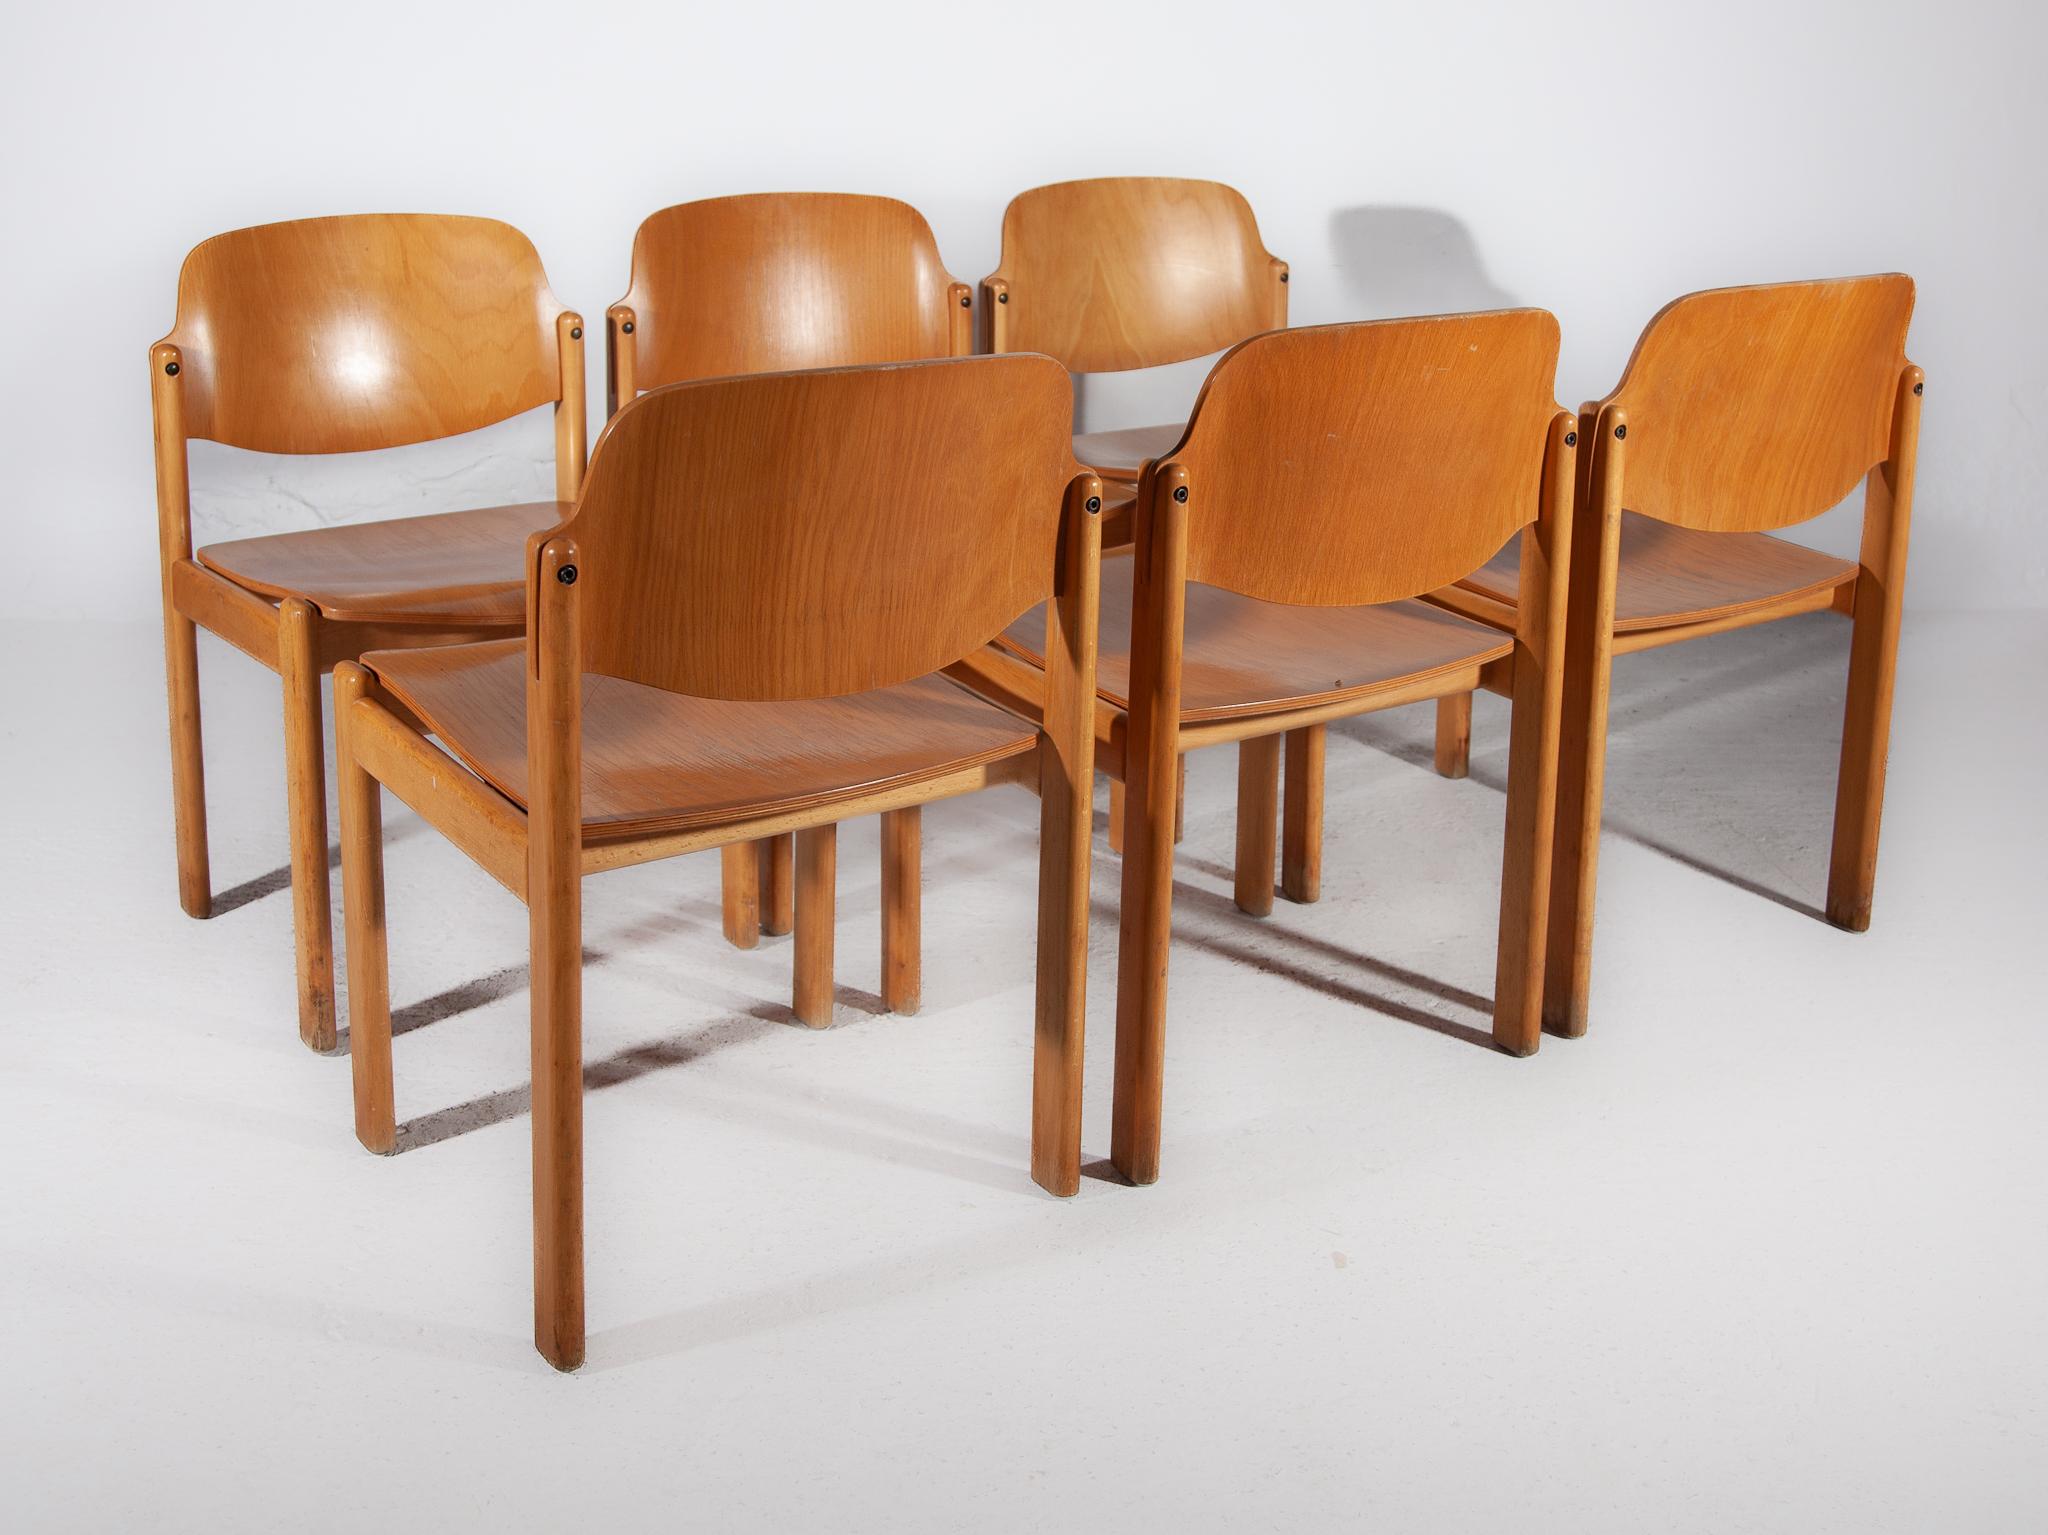 Set of Twelve Beech Wood Dining Chairs, Germany 1970s For Sale 9